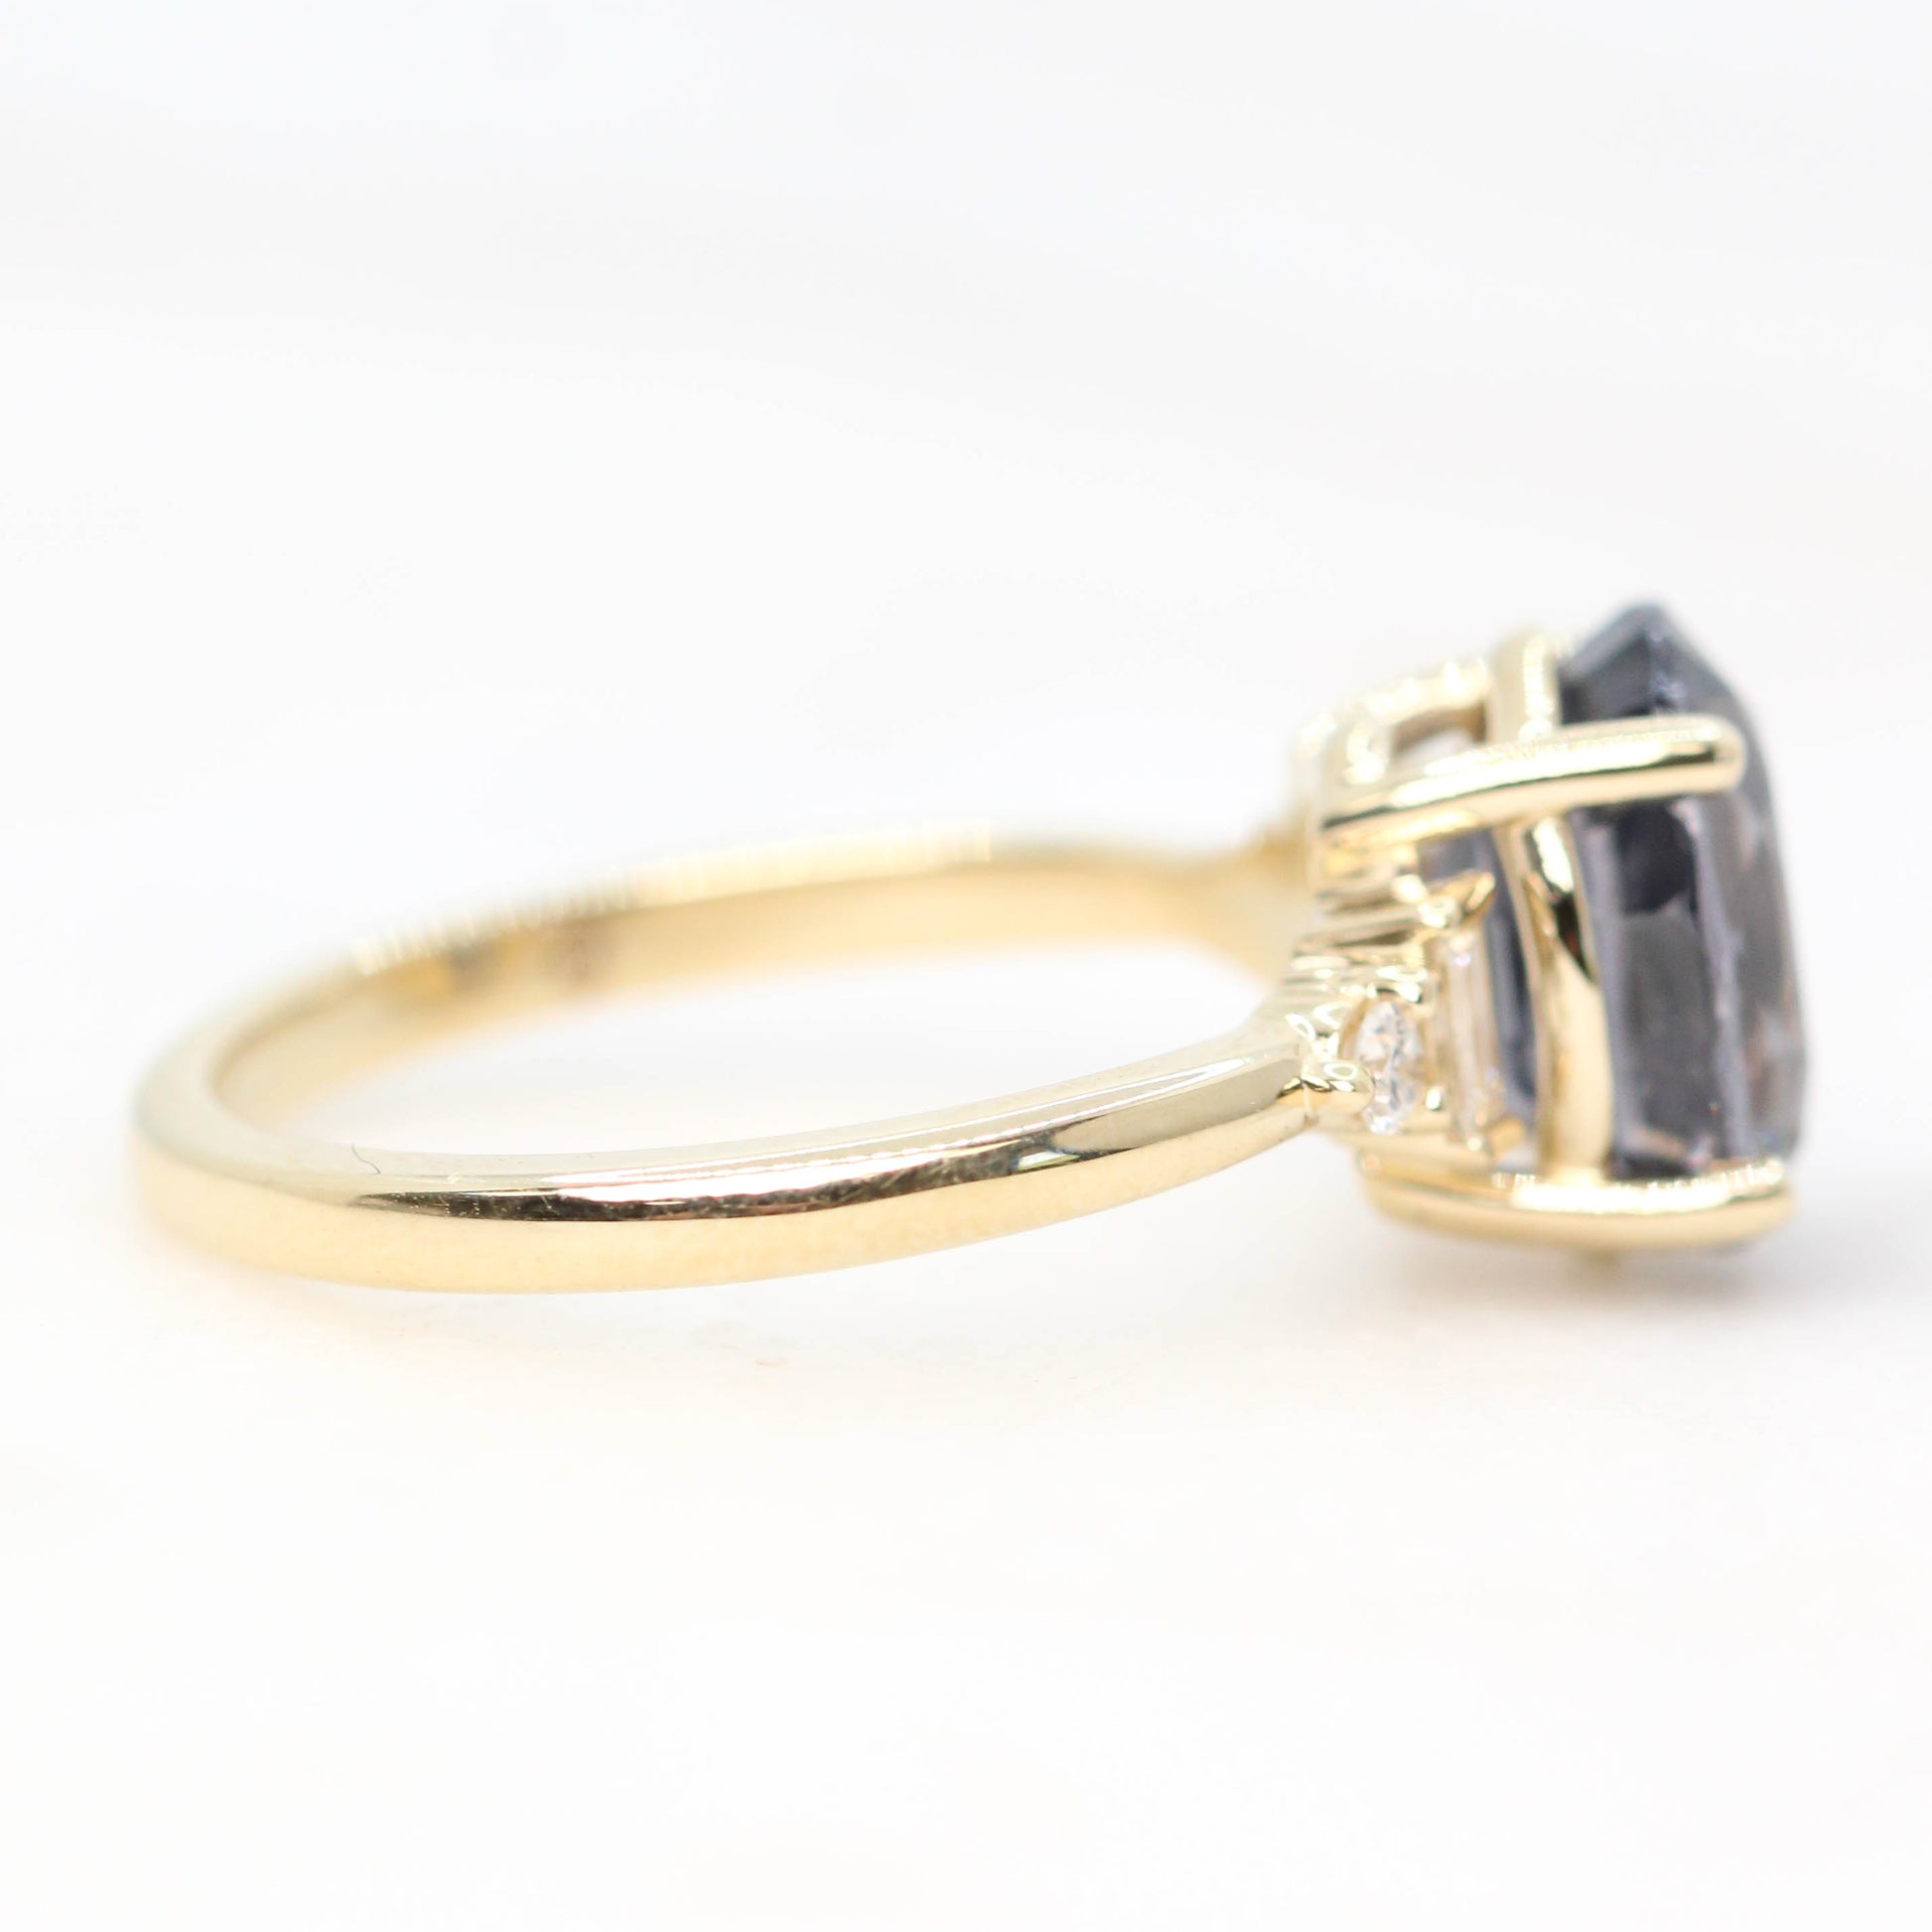 Iris Ring with a 3.87 Carat Oval Spinel and White Accent Diamonds in 14k Yellow Gold - Ready to Size and Ship - Midwinter Co. Alternative Bridal Rings and Modern Fine Jewelry